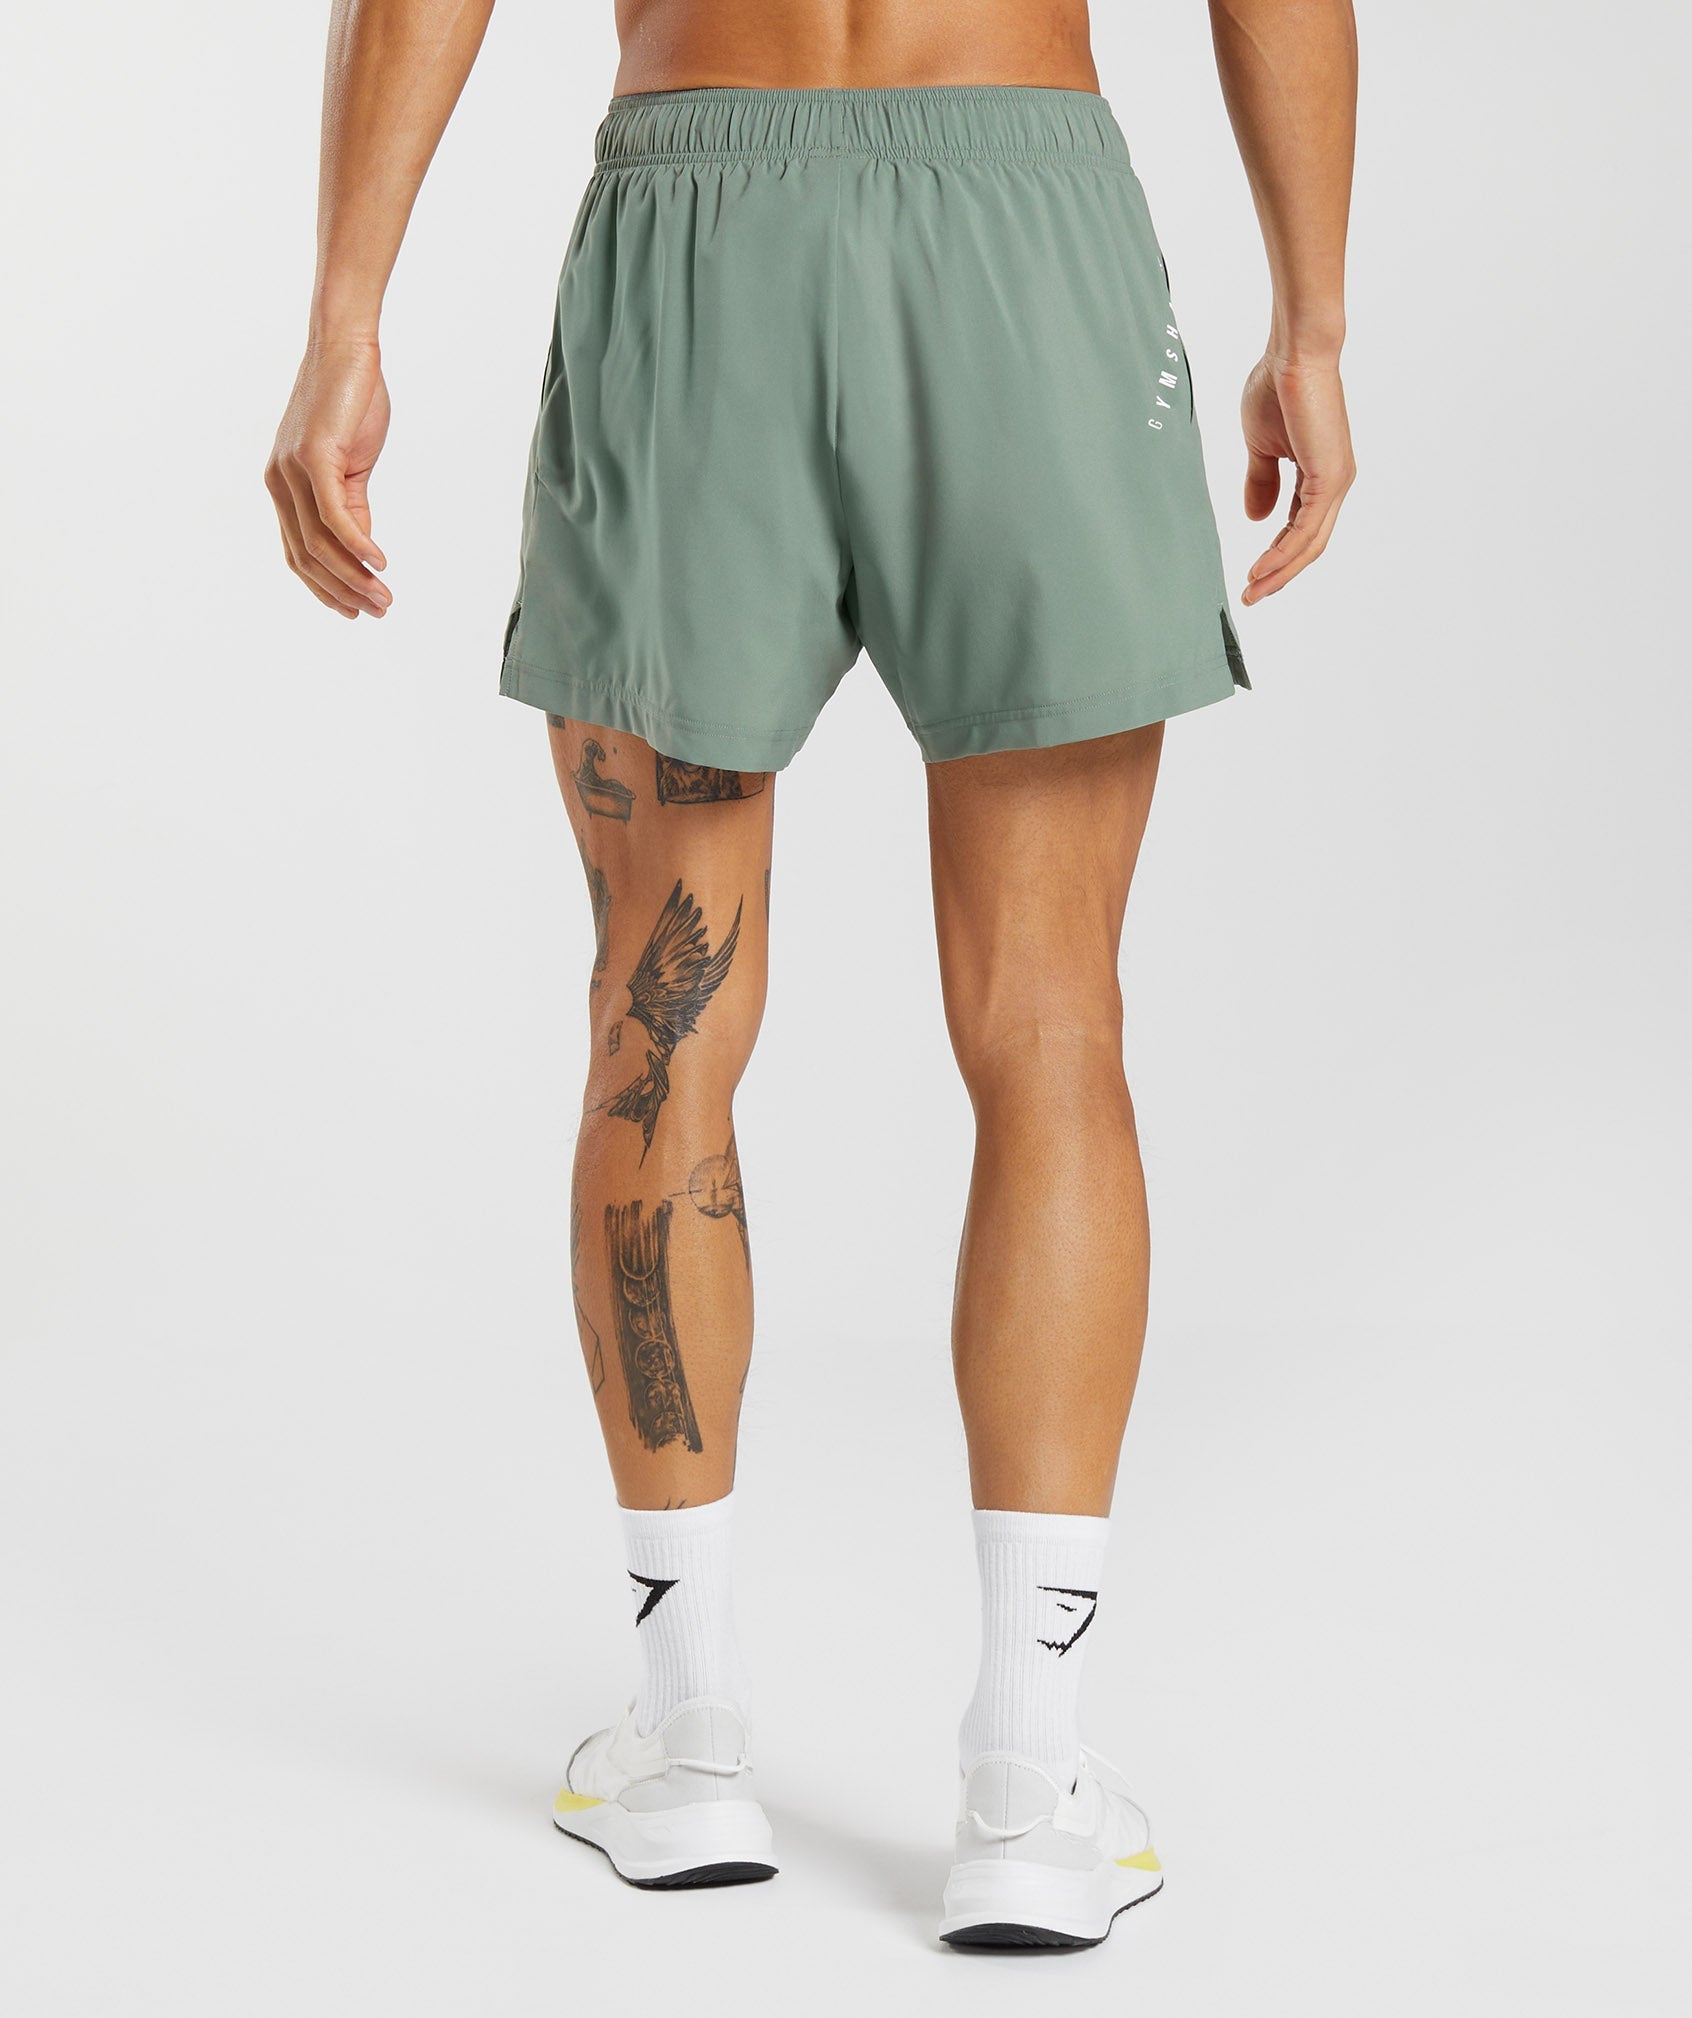 Sport 5" 2 In 1 Shorts in Willow Green/Desert Sage Green - view 2